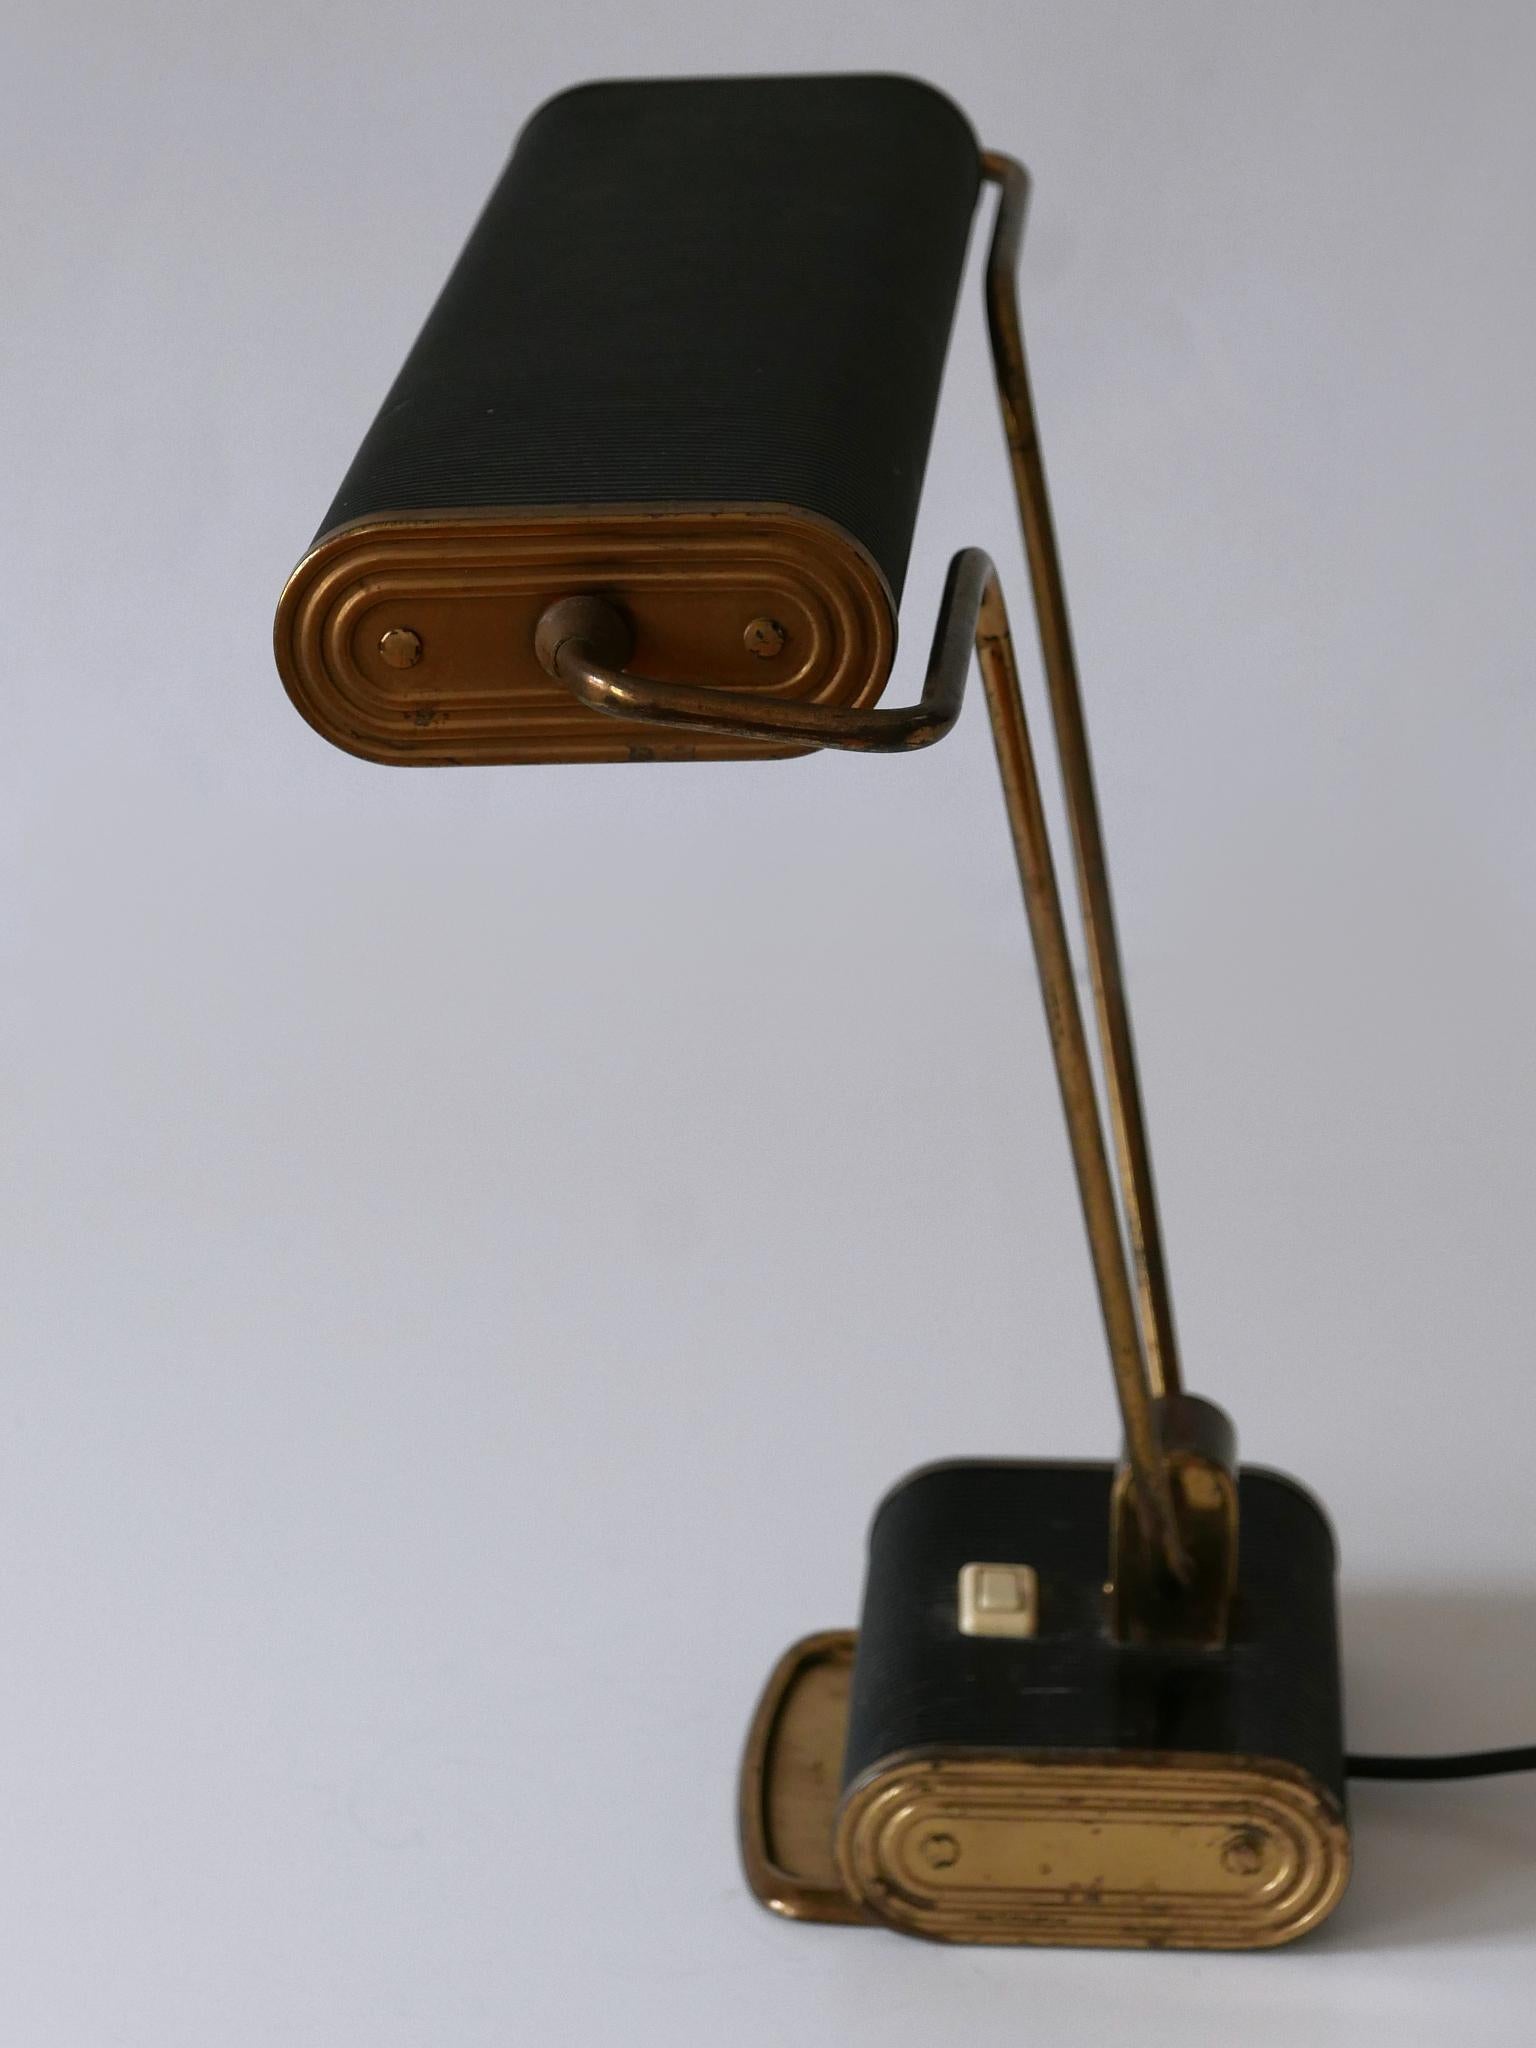 Art Deco Table Lamp or Desk Light 'No 71' by André Mounique for Jumo 1930s For Sale 5